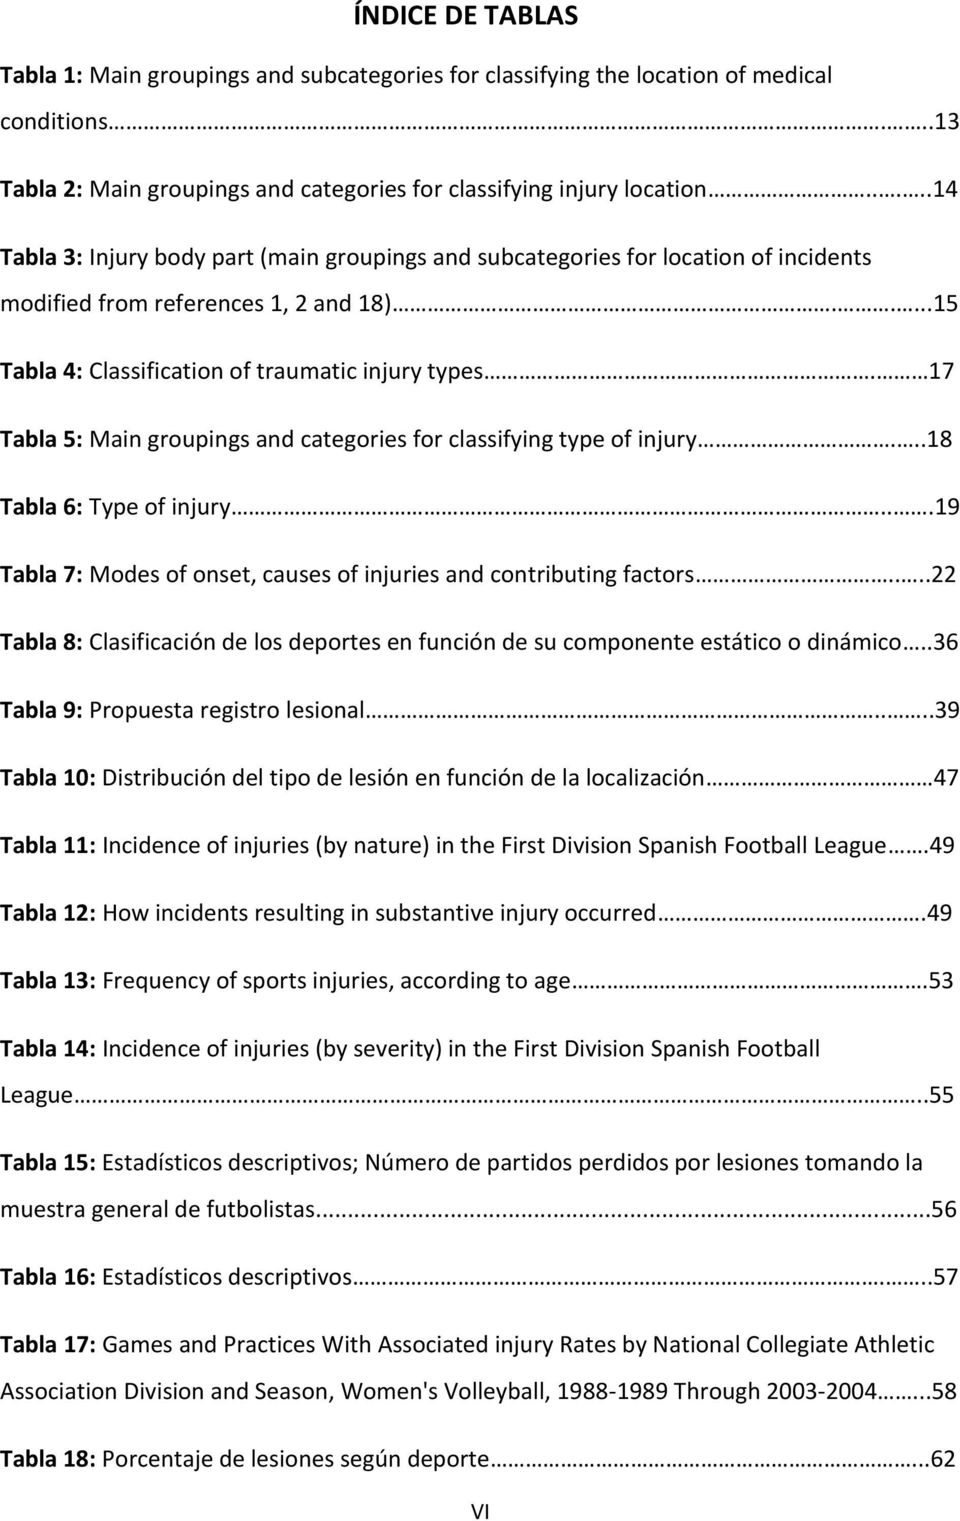 17 Tabla 5: Main groupings and categories for classifying type of injury...18 Tabla 6: Type of injury...19 Tabla 7: Modes of onset, causes of injuries and contributing factors.